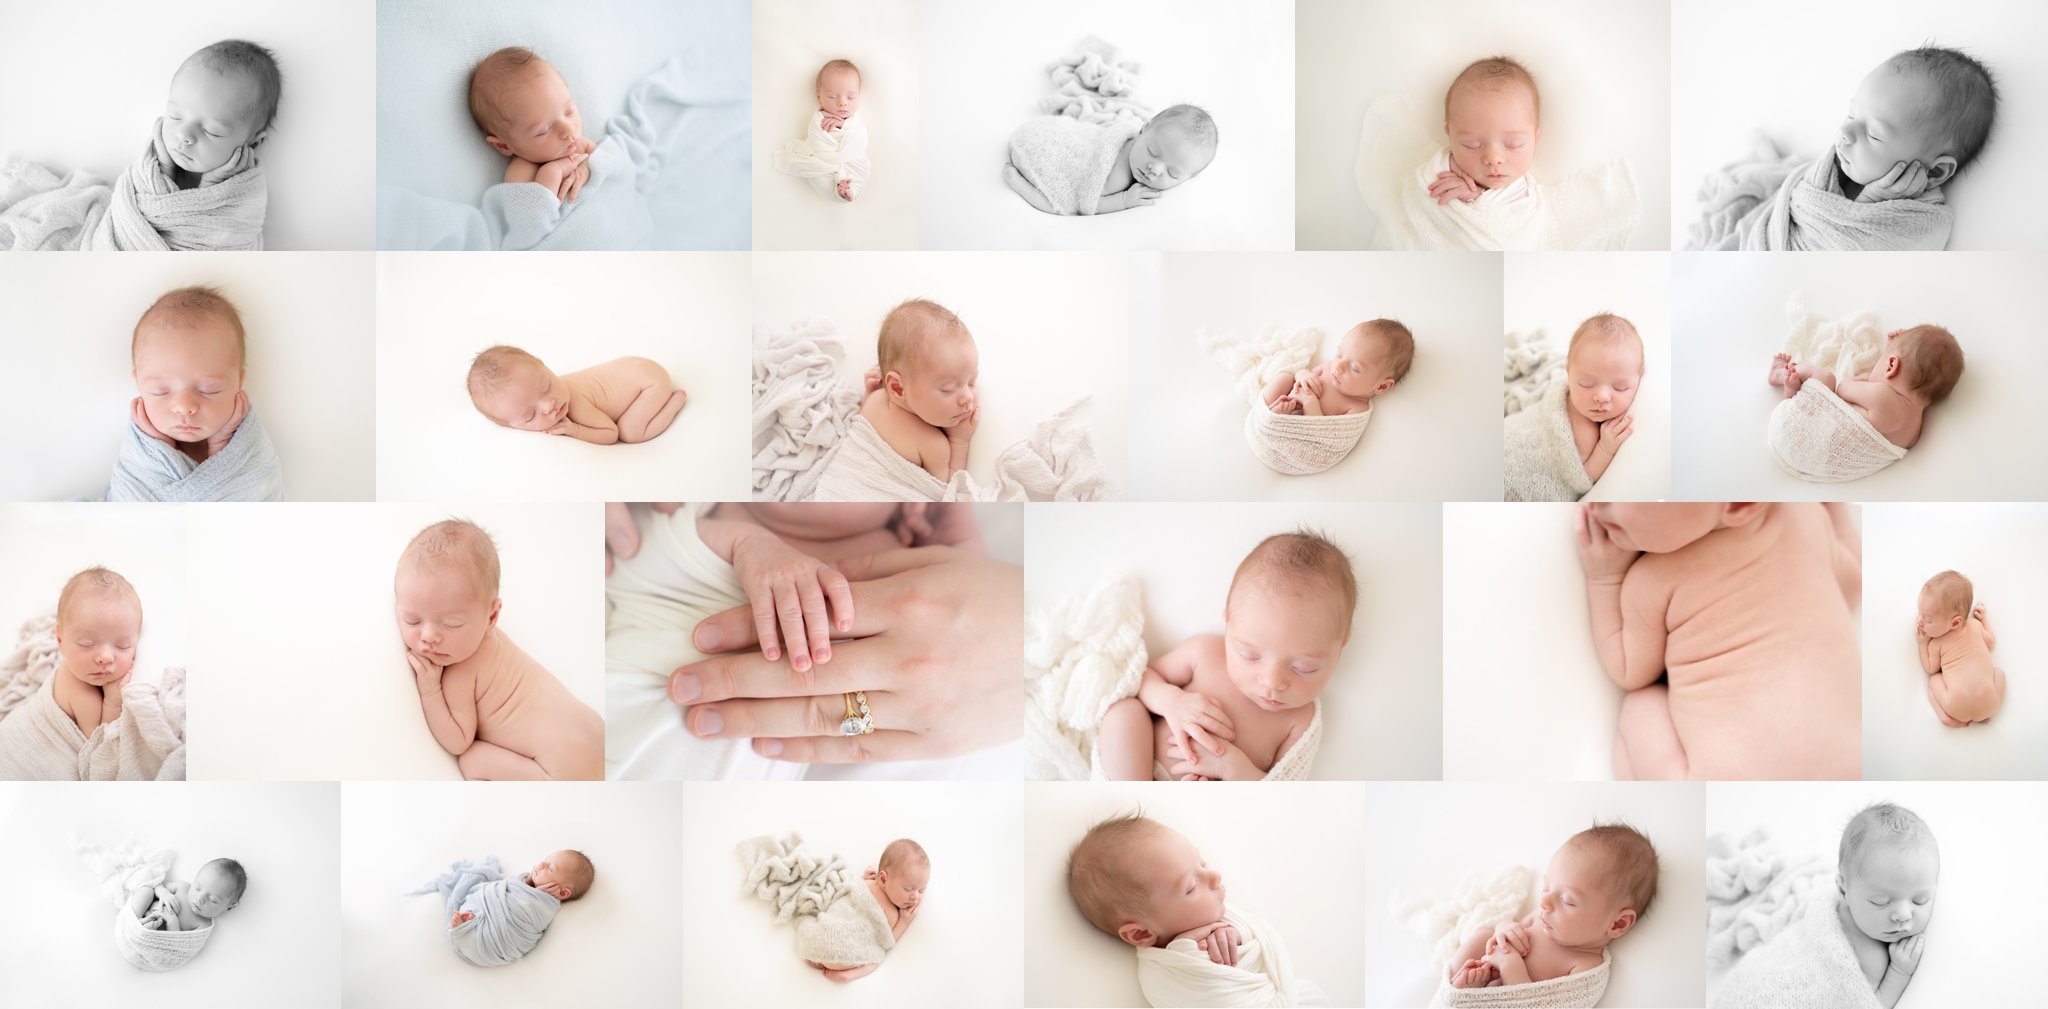 Newborn baby gallery of images photographed in studio in Jupiter Fl